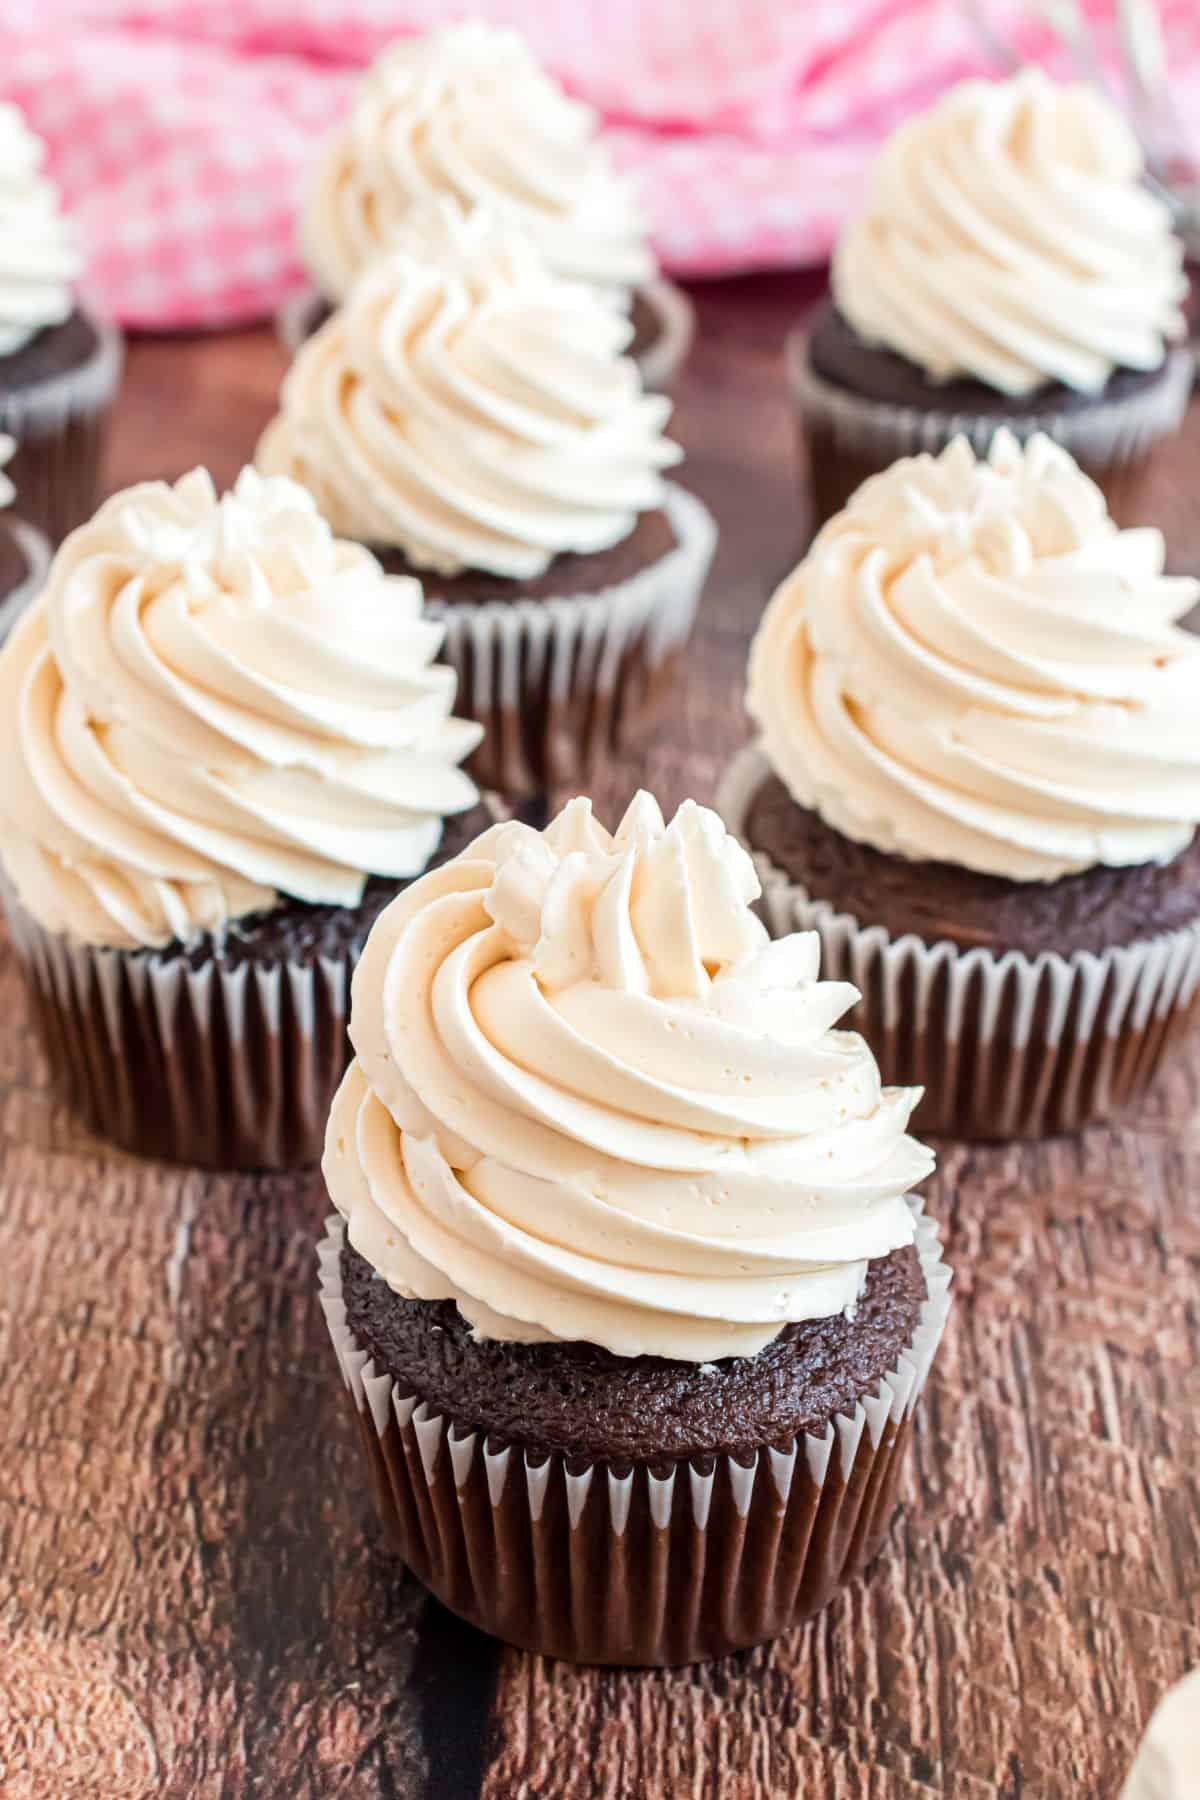 Salted caramel frosting piped high on a chocolate cupcake.